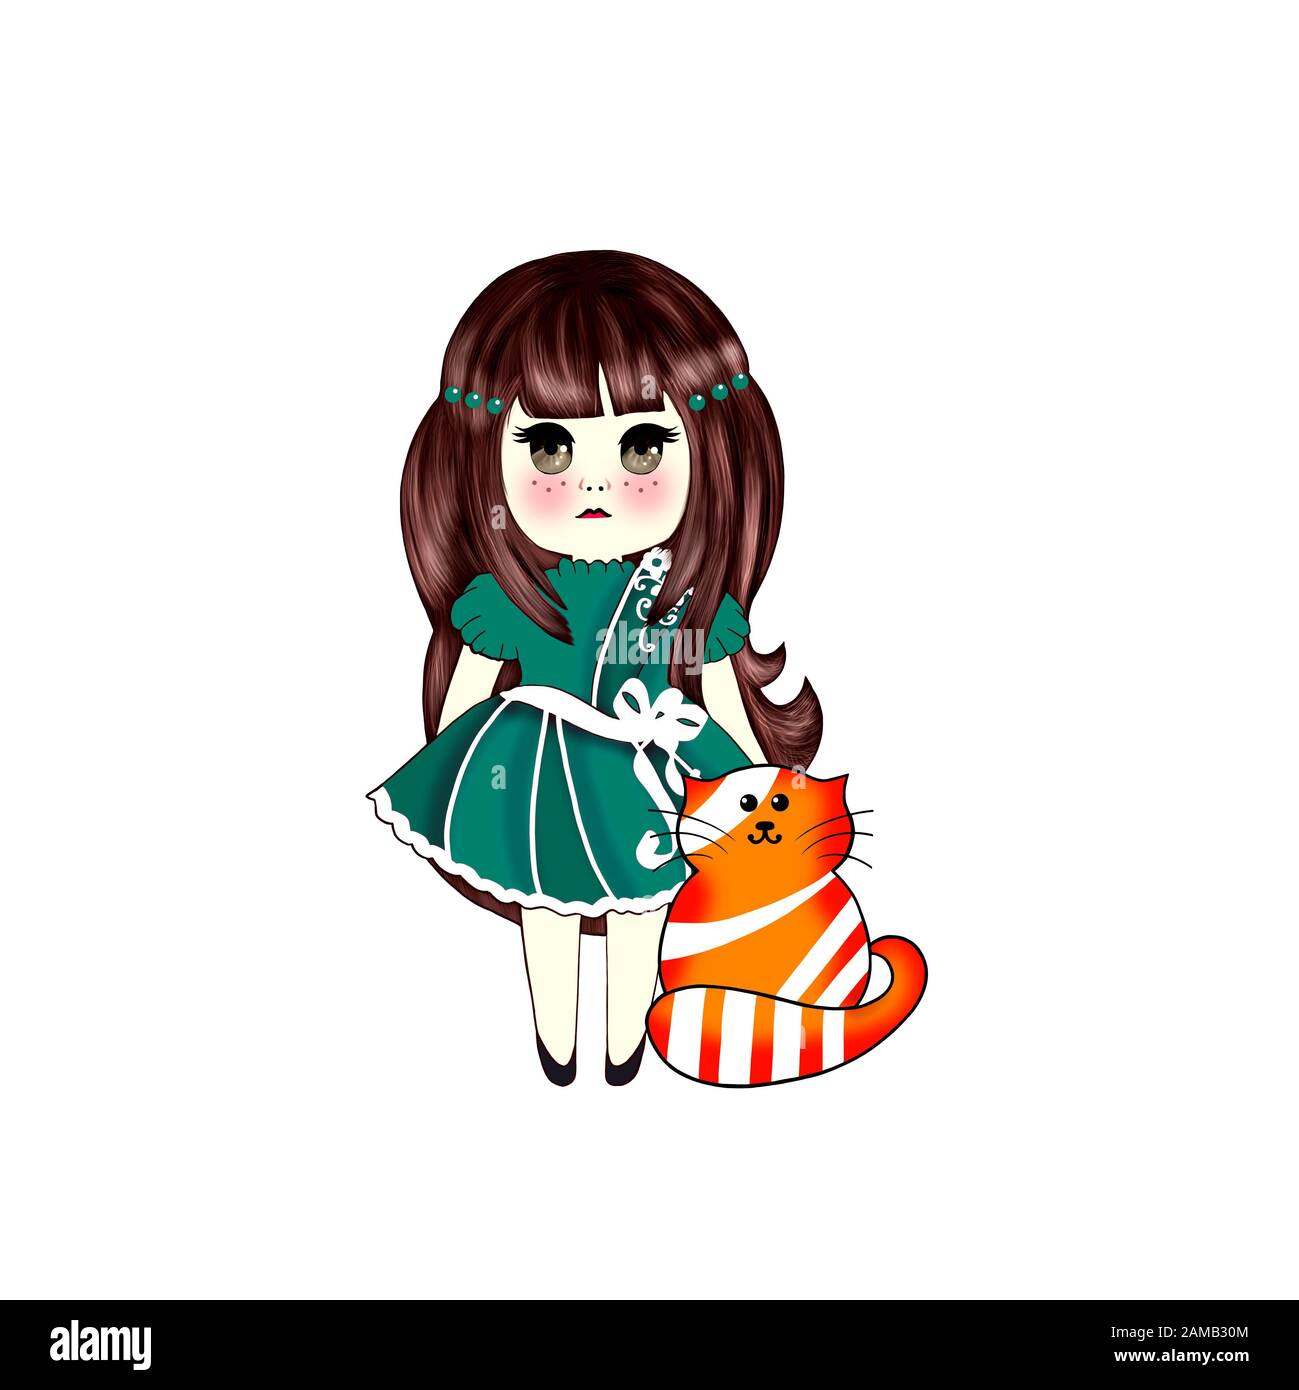 Kawaii Girl in a Green Dress with Kawaii Red Cats. Isolated on a White Background. Stock Photo